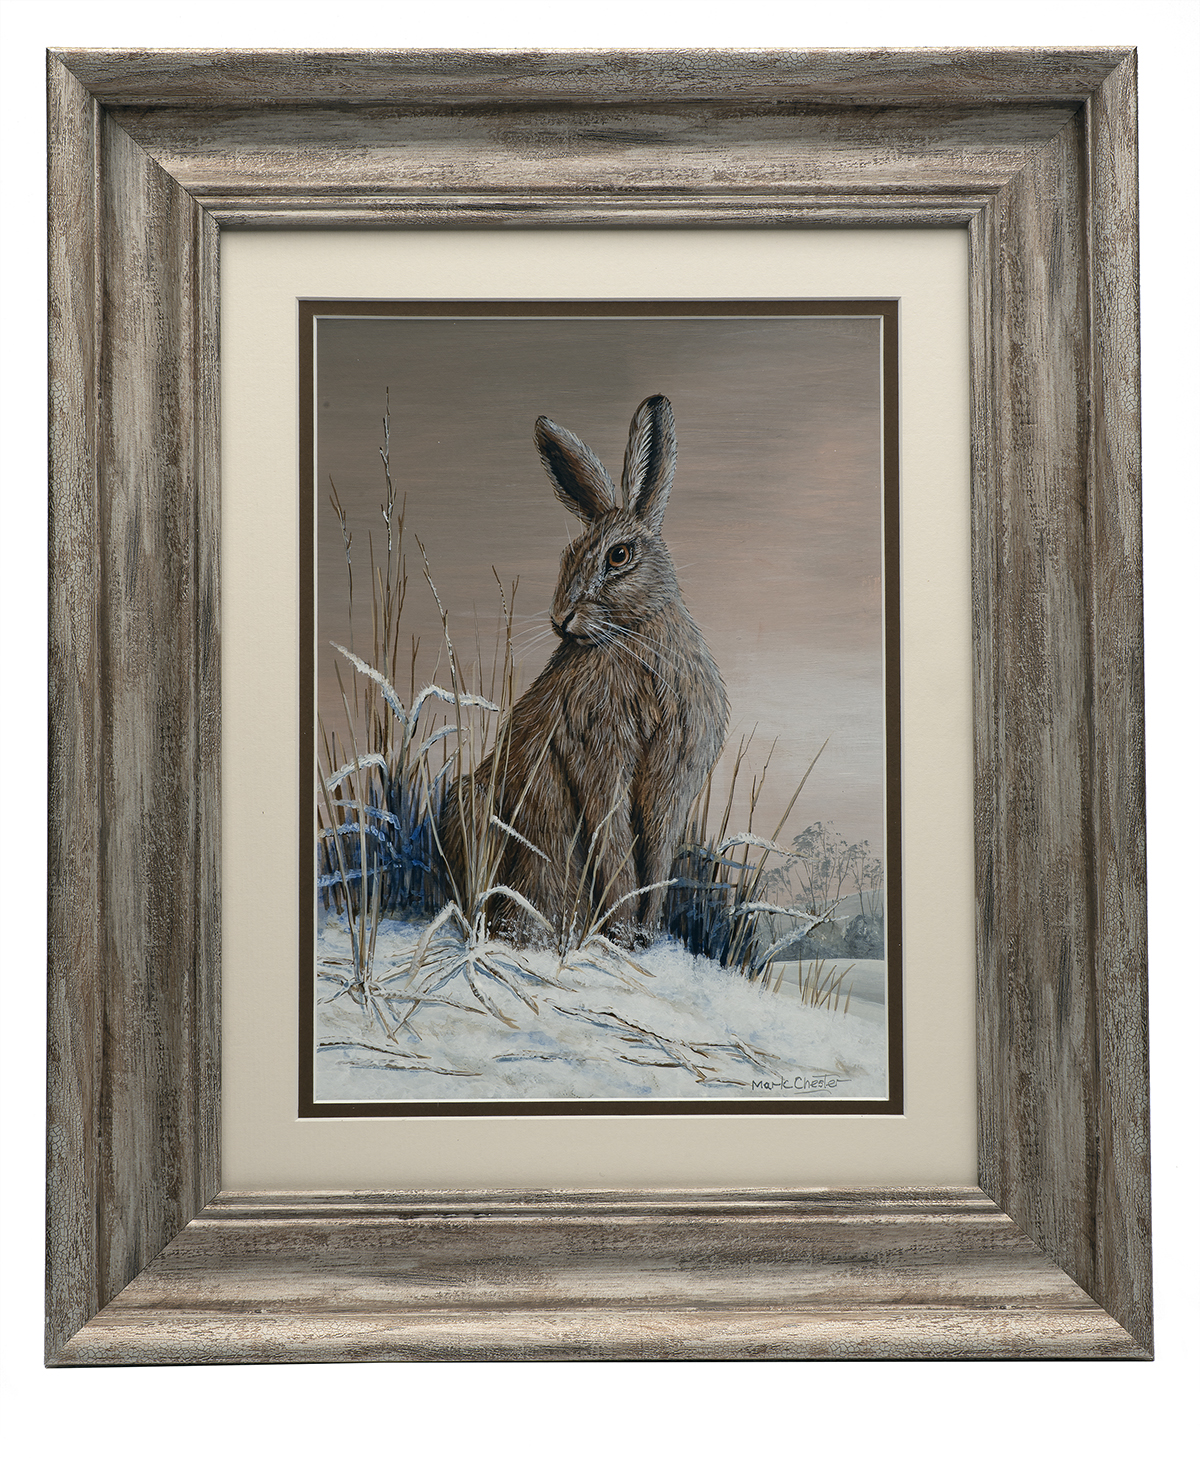 MARK CHESTER (F.W.A.S.) 'EVENING HARE', an original painting signed by the artist, showing a hare in